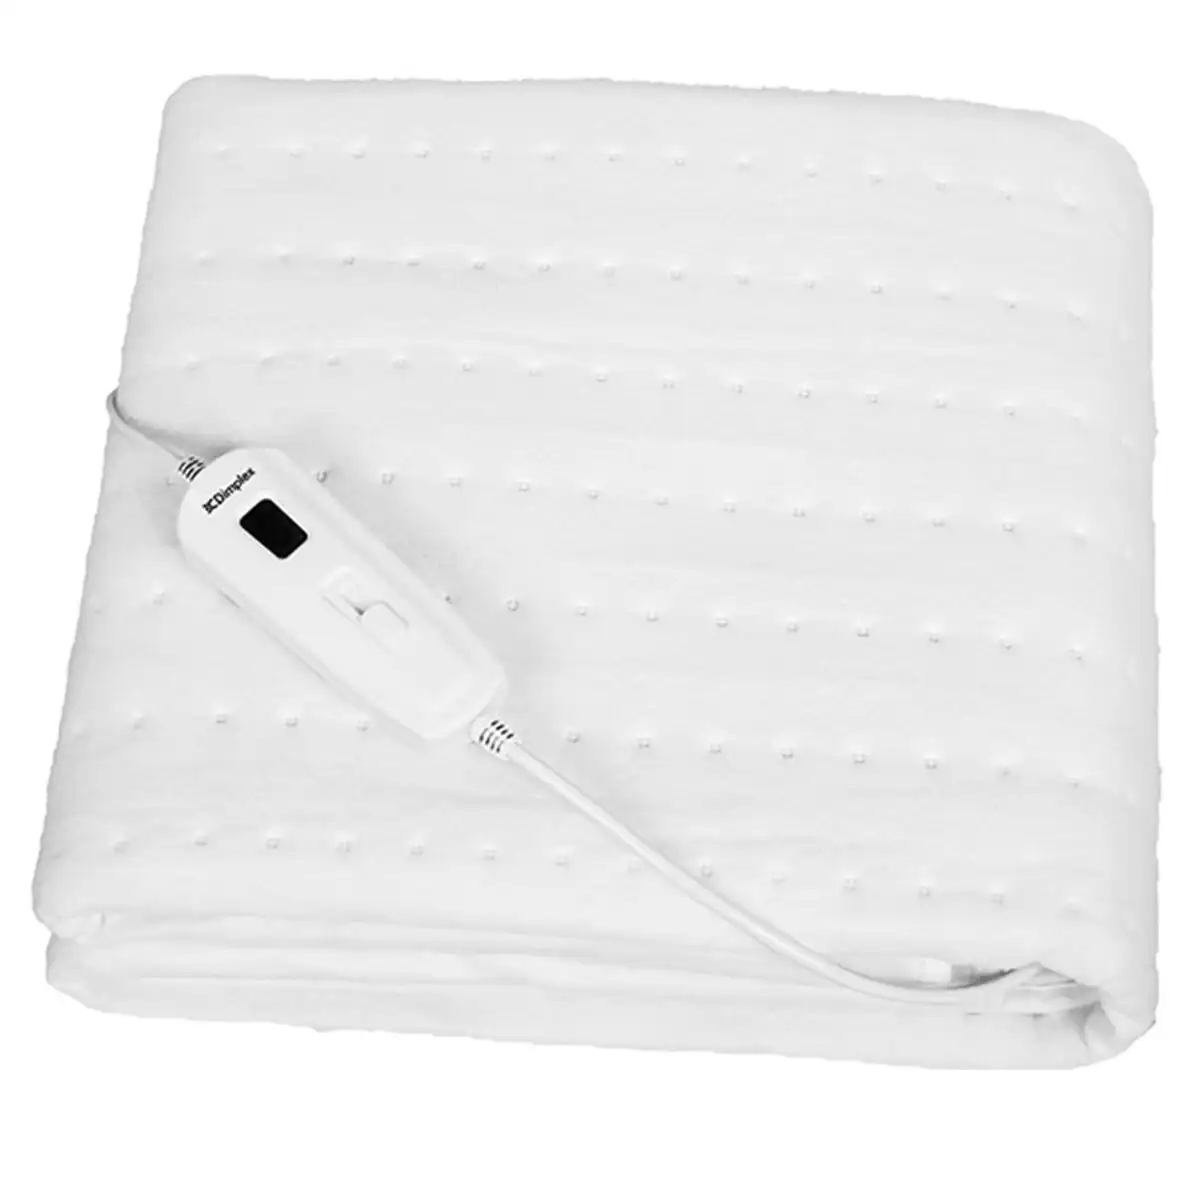 Dimplex Single Fitted Electric Blanket